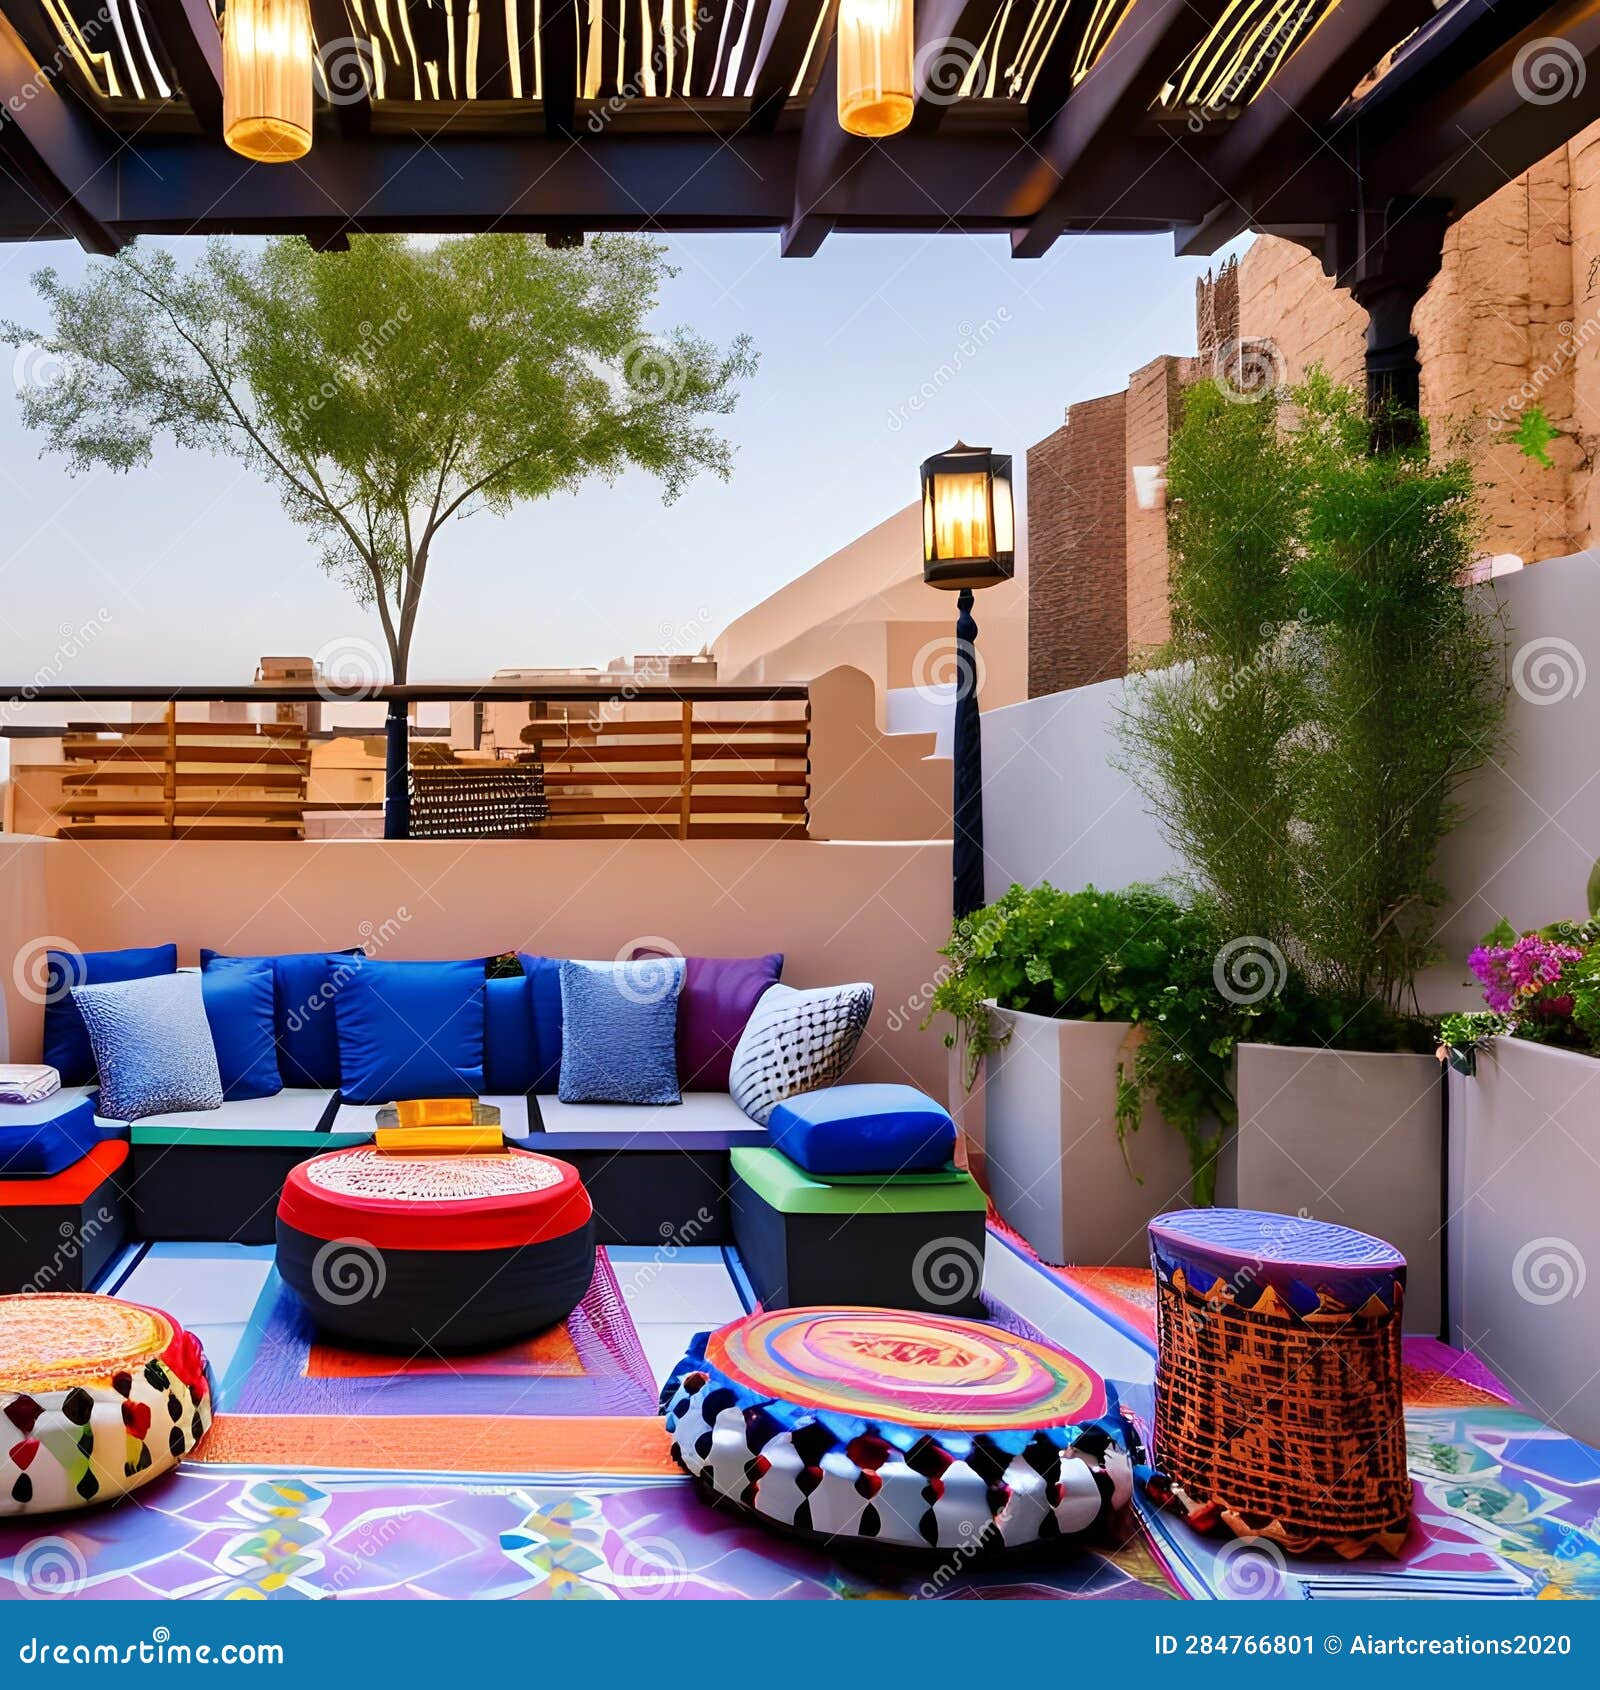 Moroccan Home Decor Ideas You'll Want to Get for Your City Apartment